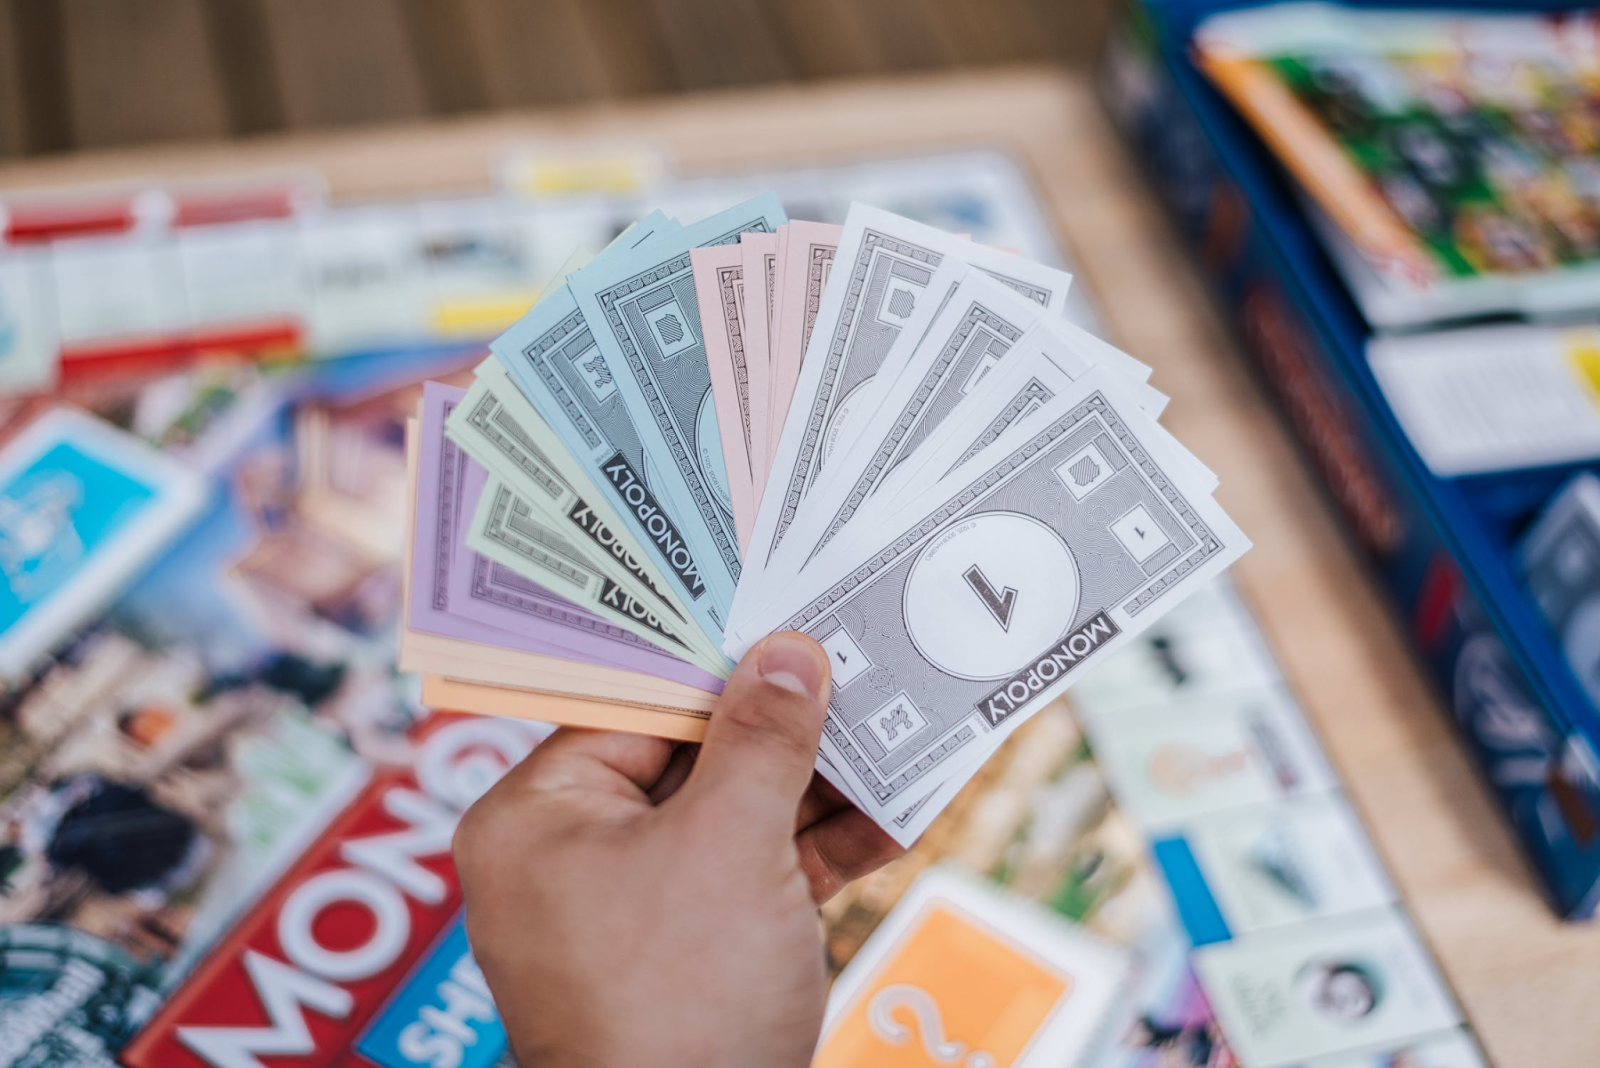 A person holding a bunch of Monopoly notes flared out between their thumb and their fingers with the board game in the background.